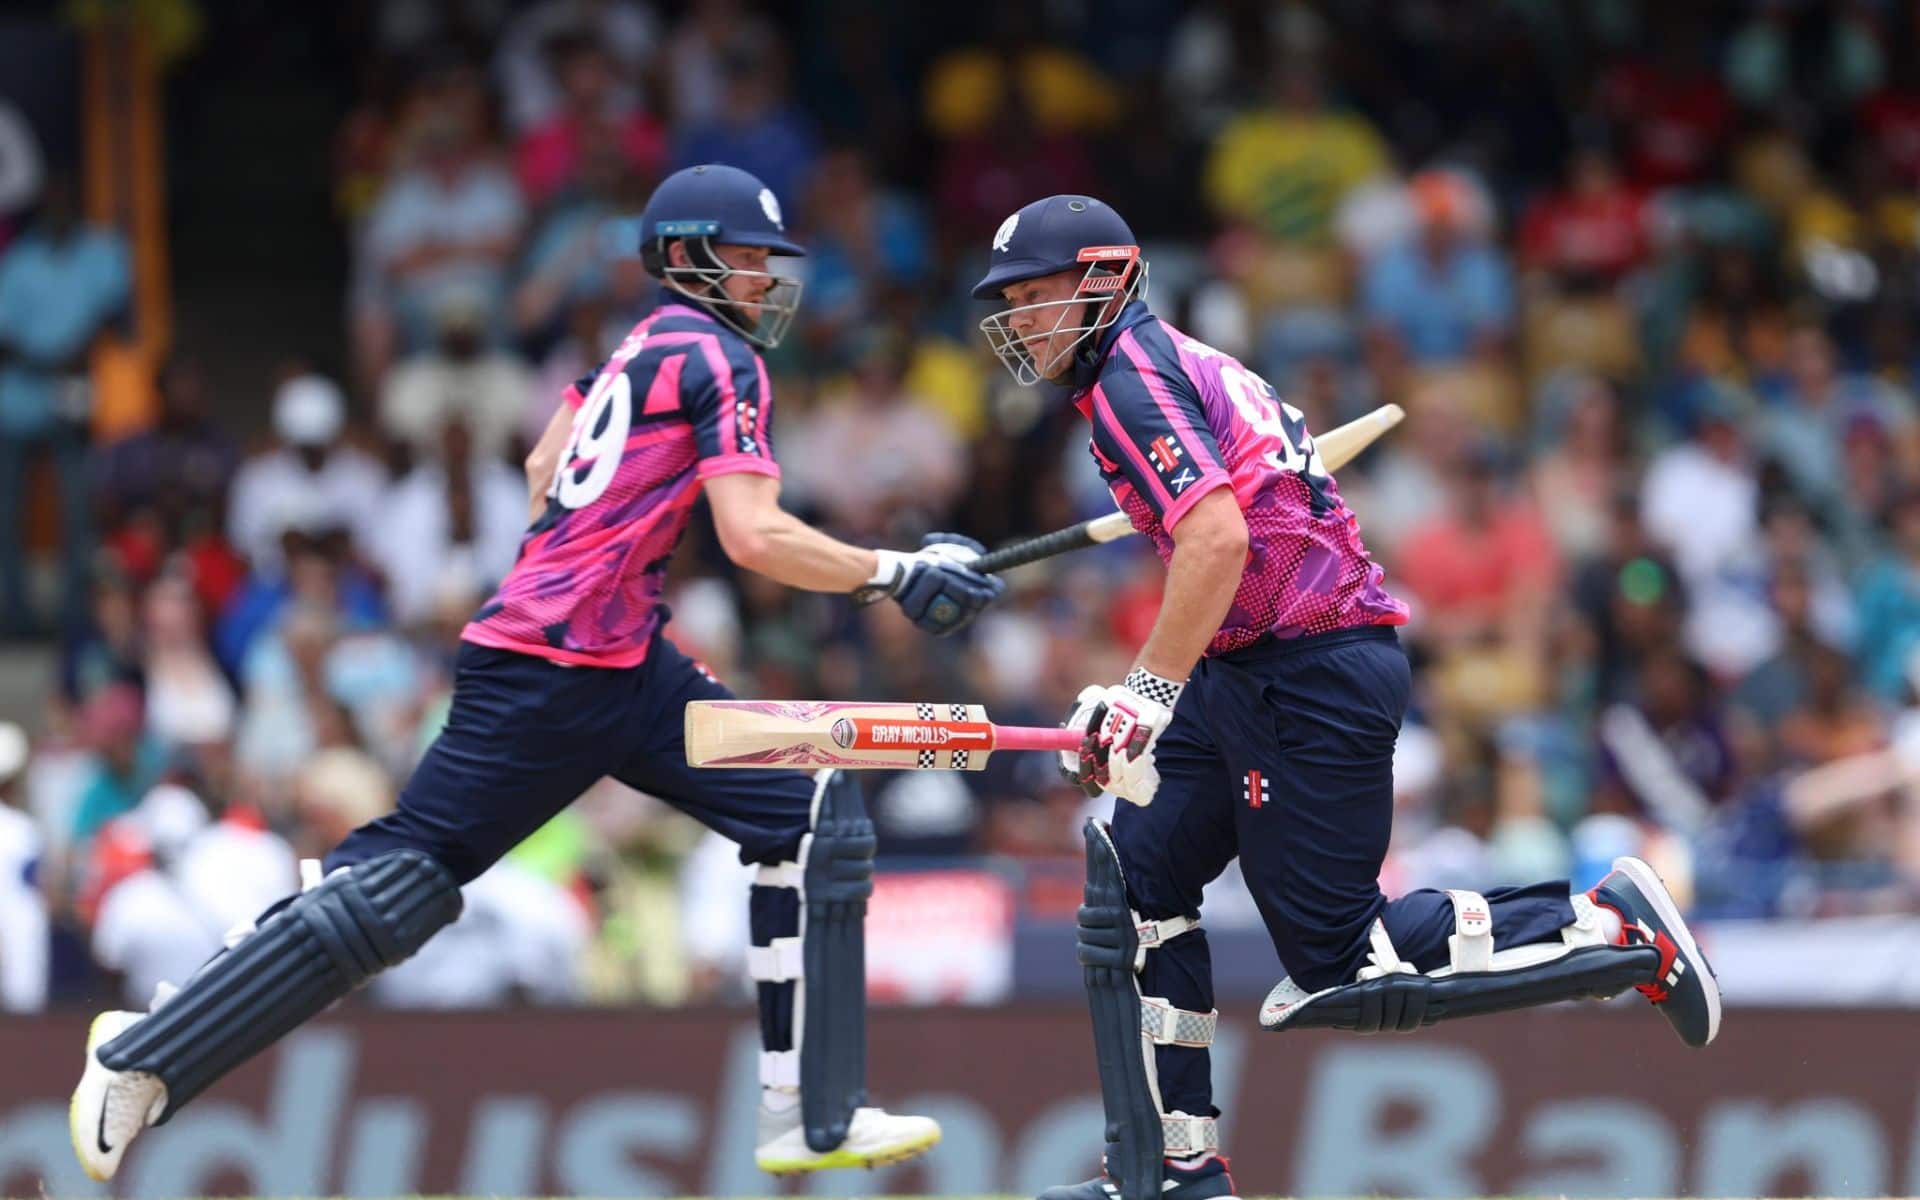 Scotland openers trashing English bowlers during T20 World Cup group fixture (X.com)